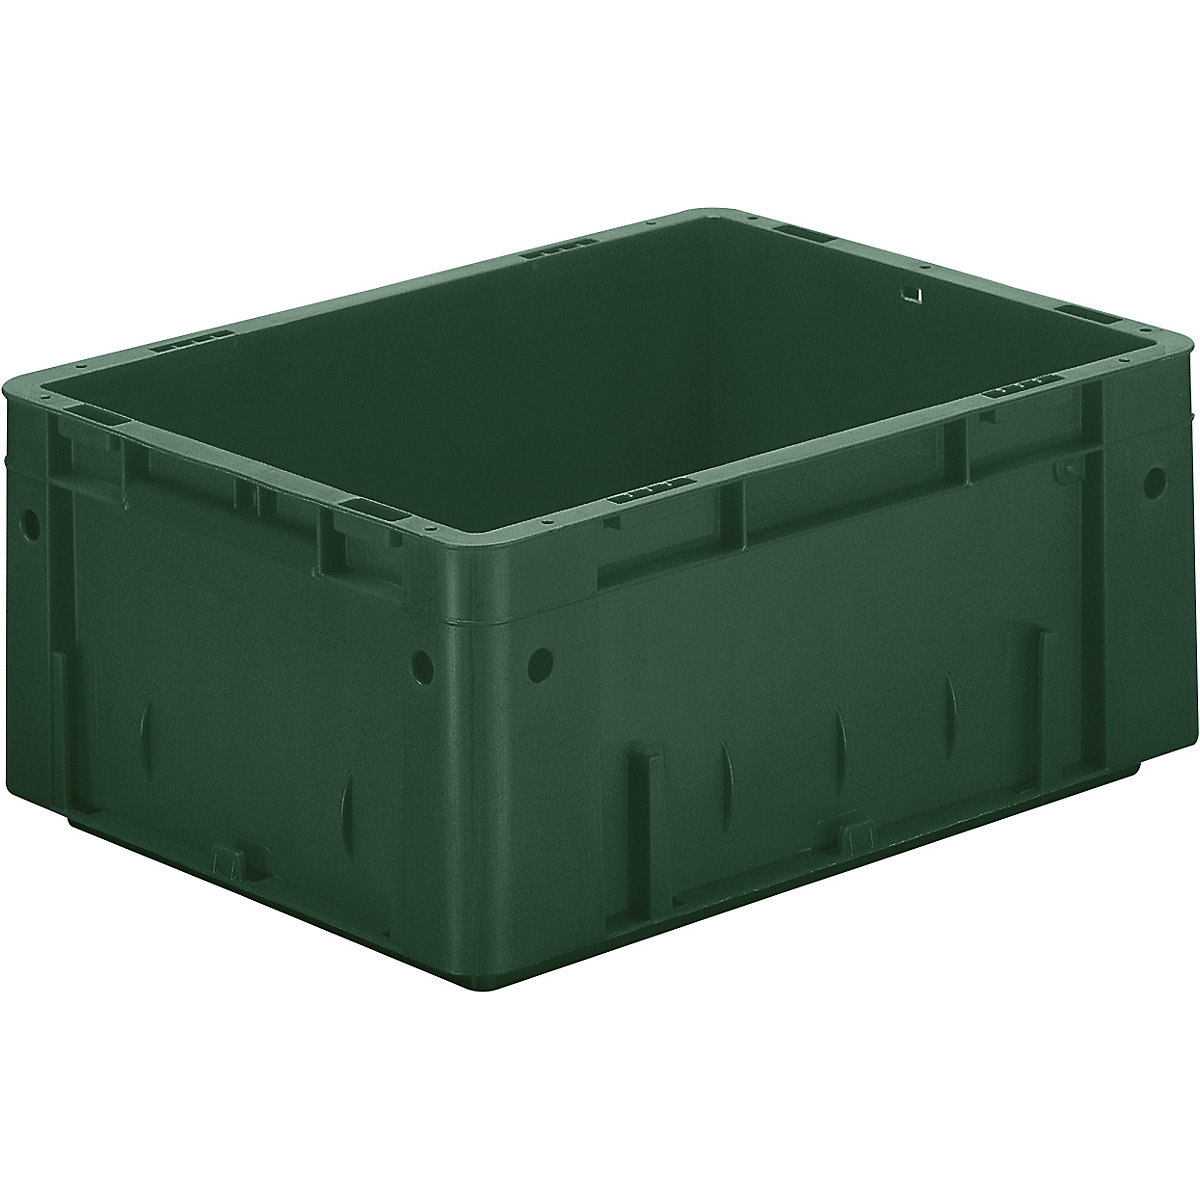 Heavy duty Euro container, polypropylene, capacity 14.5 l, LxWxH 400 x 300 x 175 mm, solid walls, solid base, green, pack of 4-3